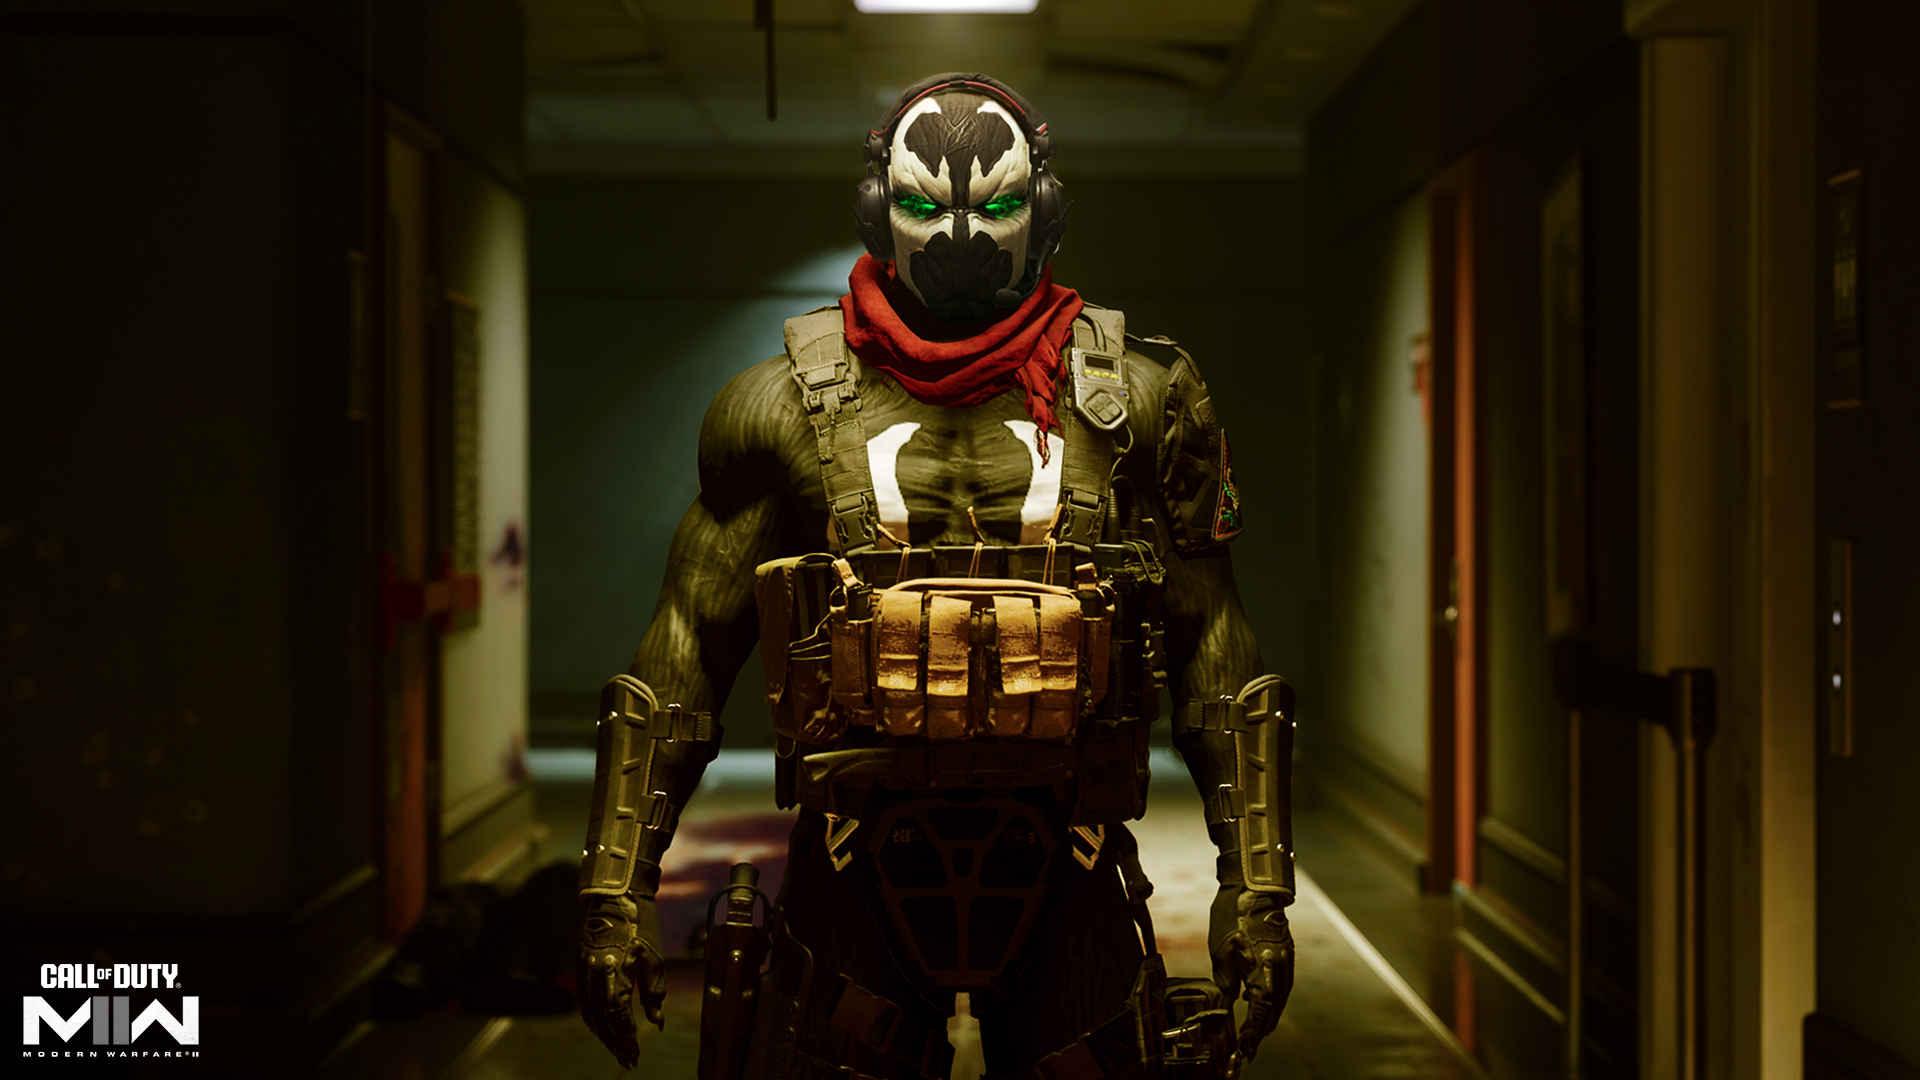 The Call of Duty: Warzone x DOOM crossover is a true gift for fans of